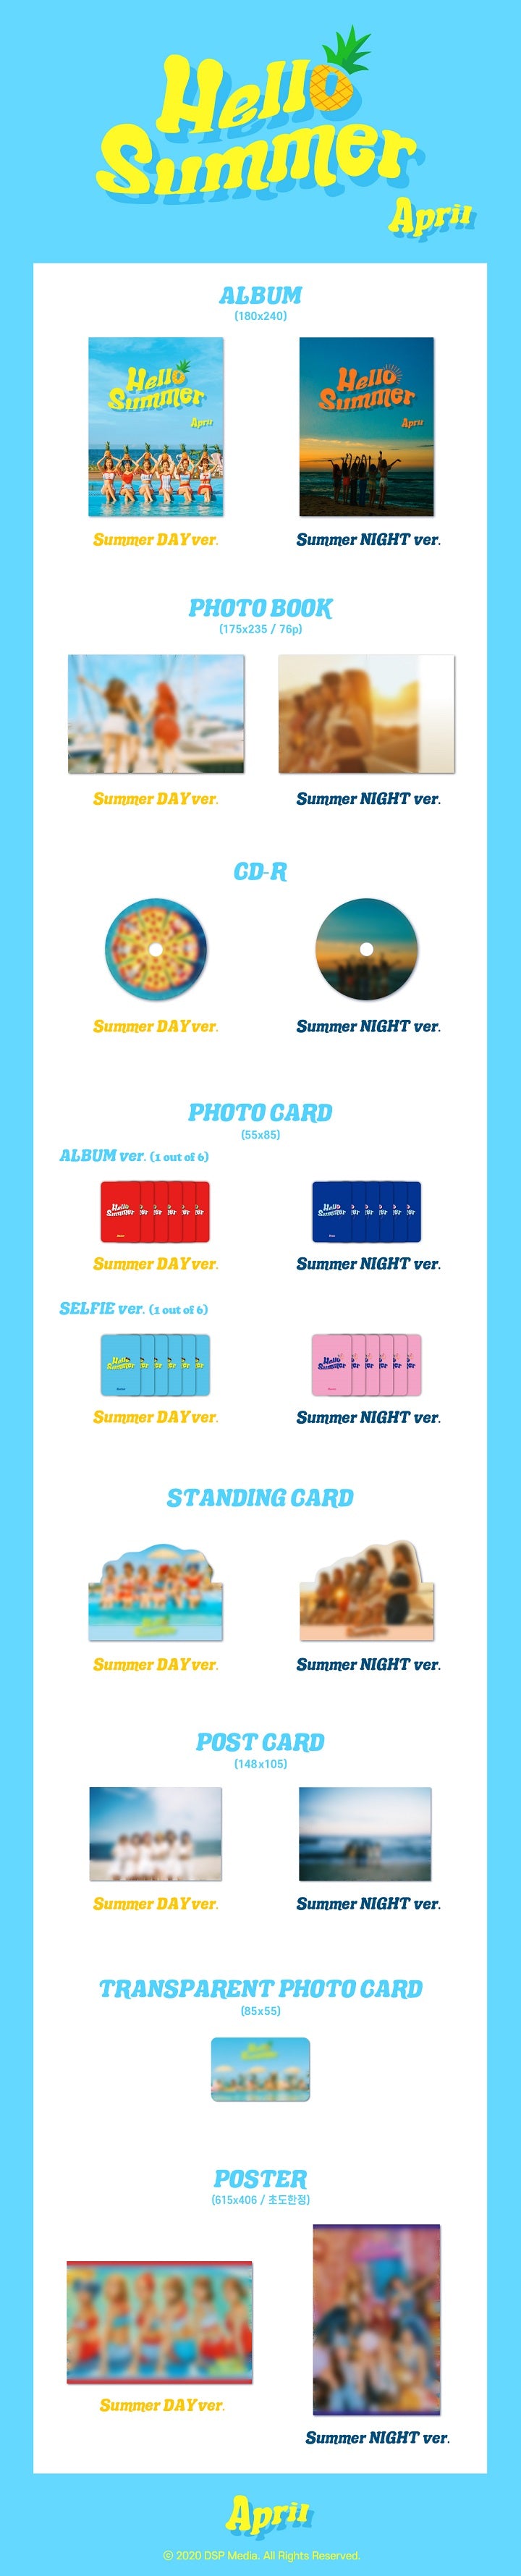 1 CD
1 Photo Book
2 Cards
1 Post
1 Standing
1 Transparent Card